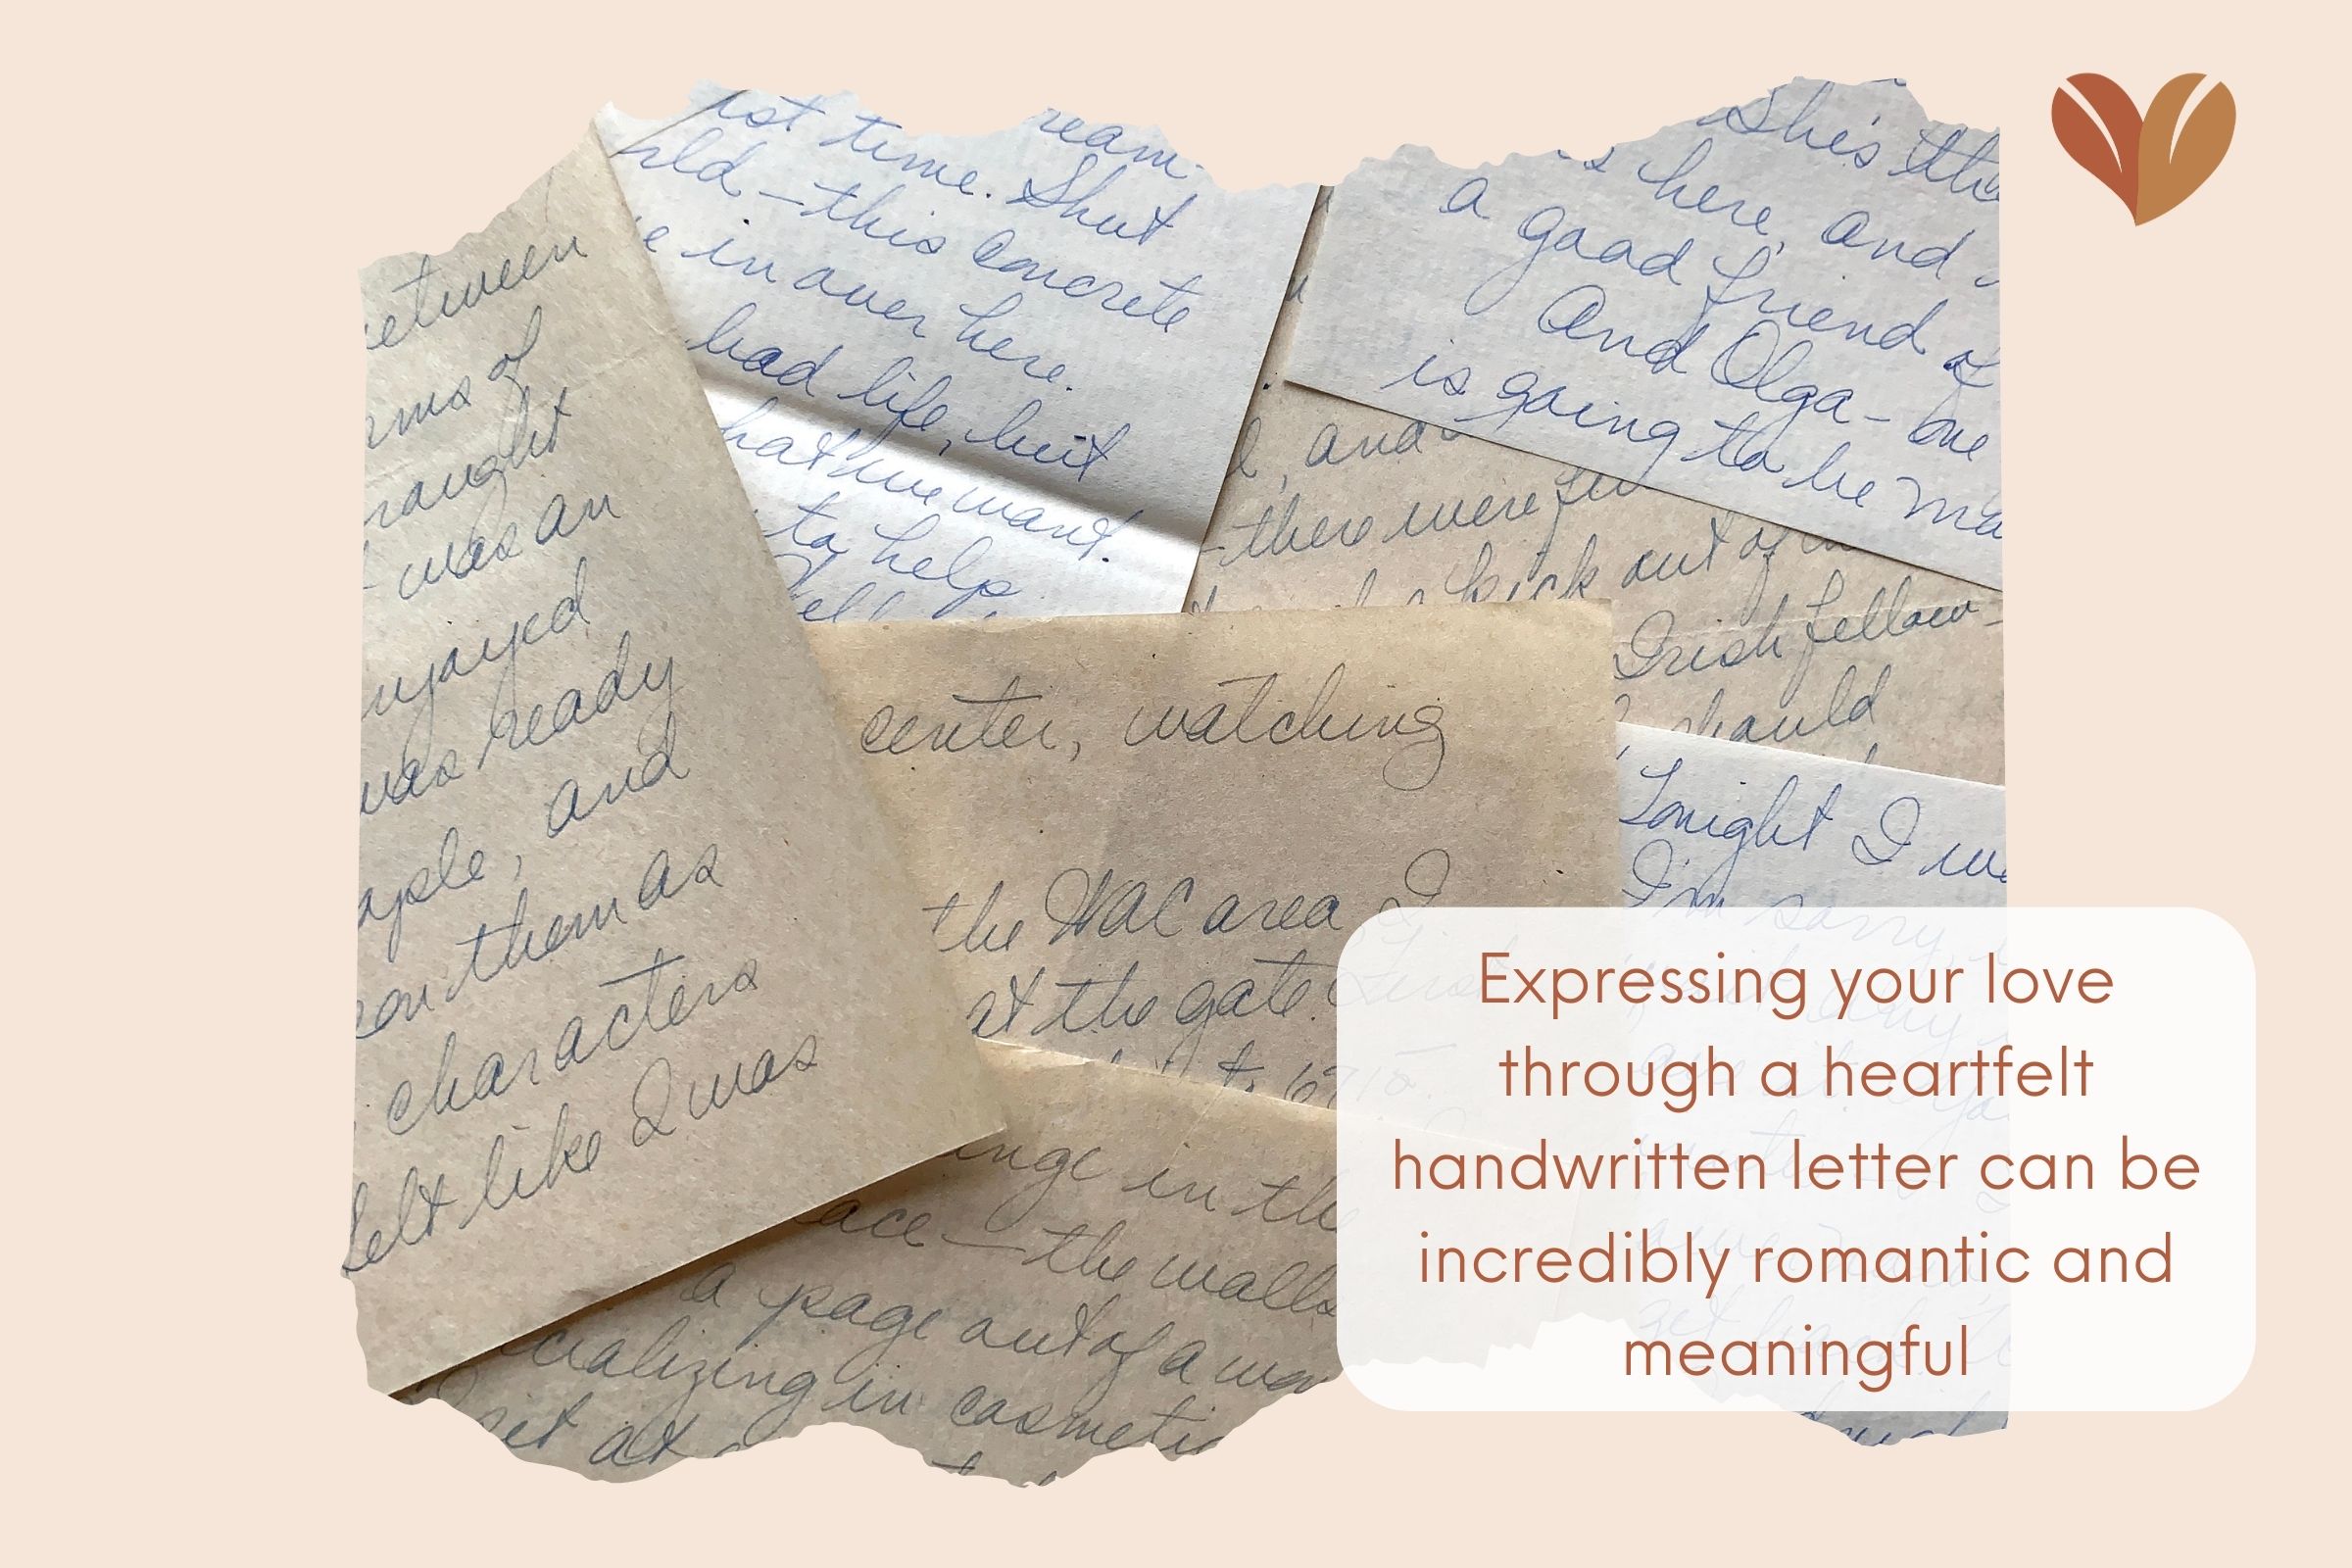 Expressing your heart by love letters